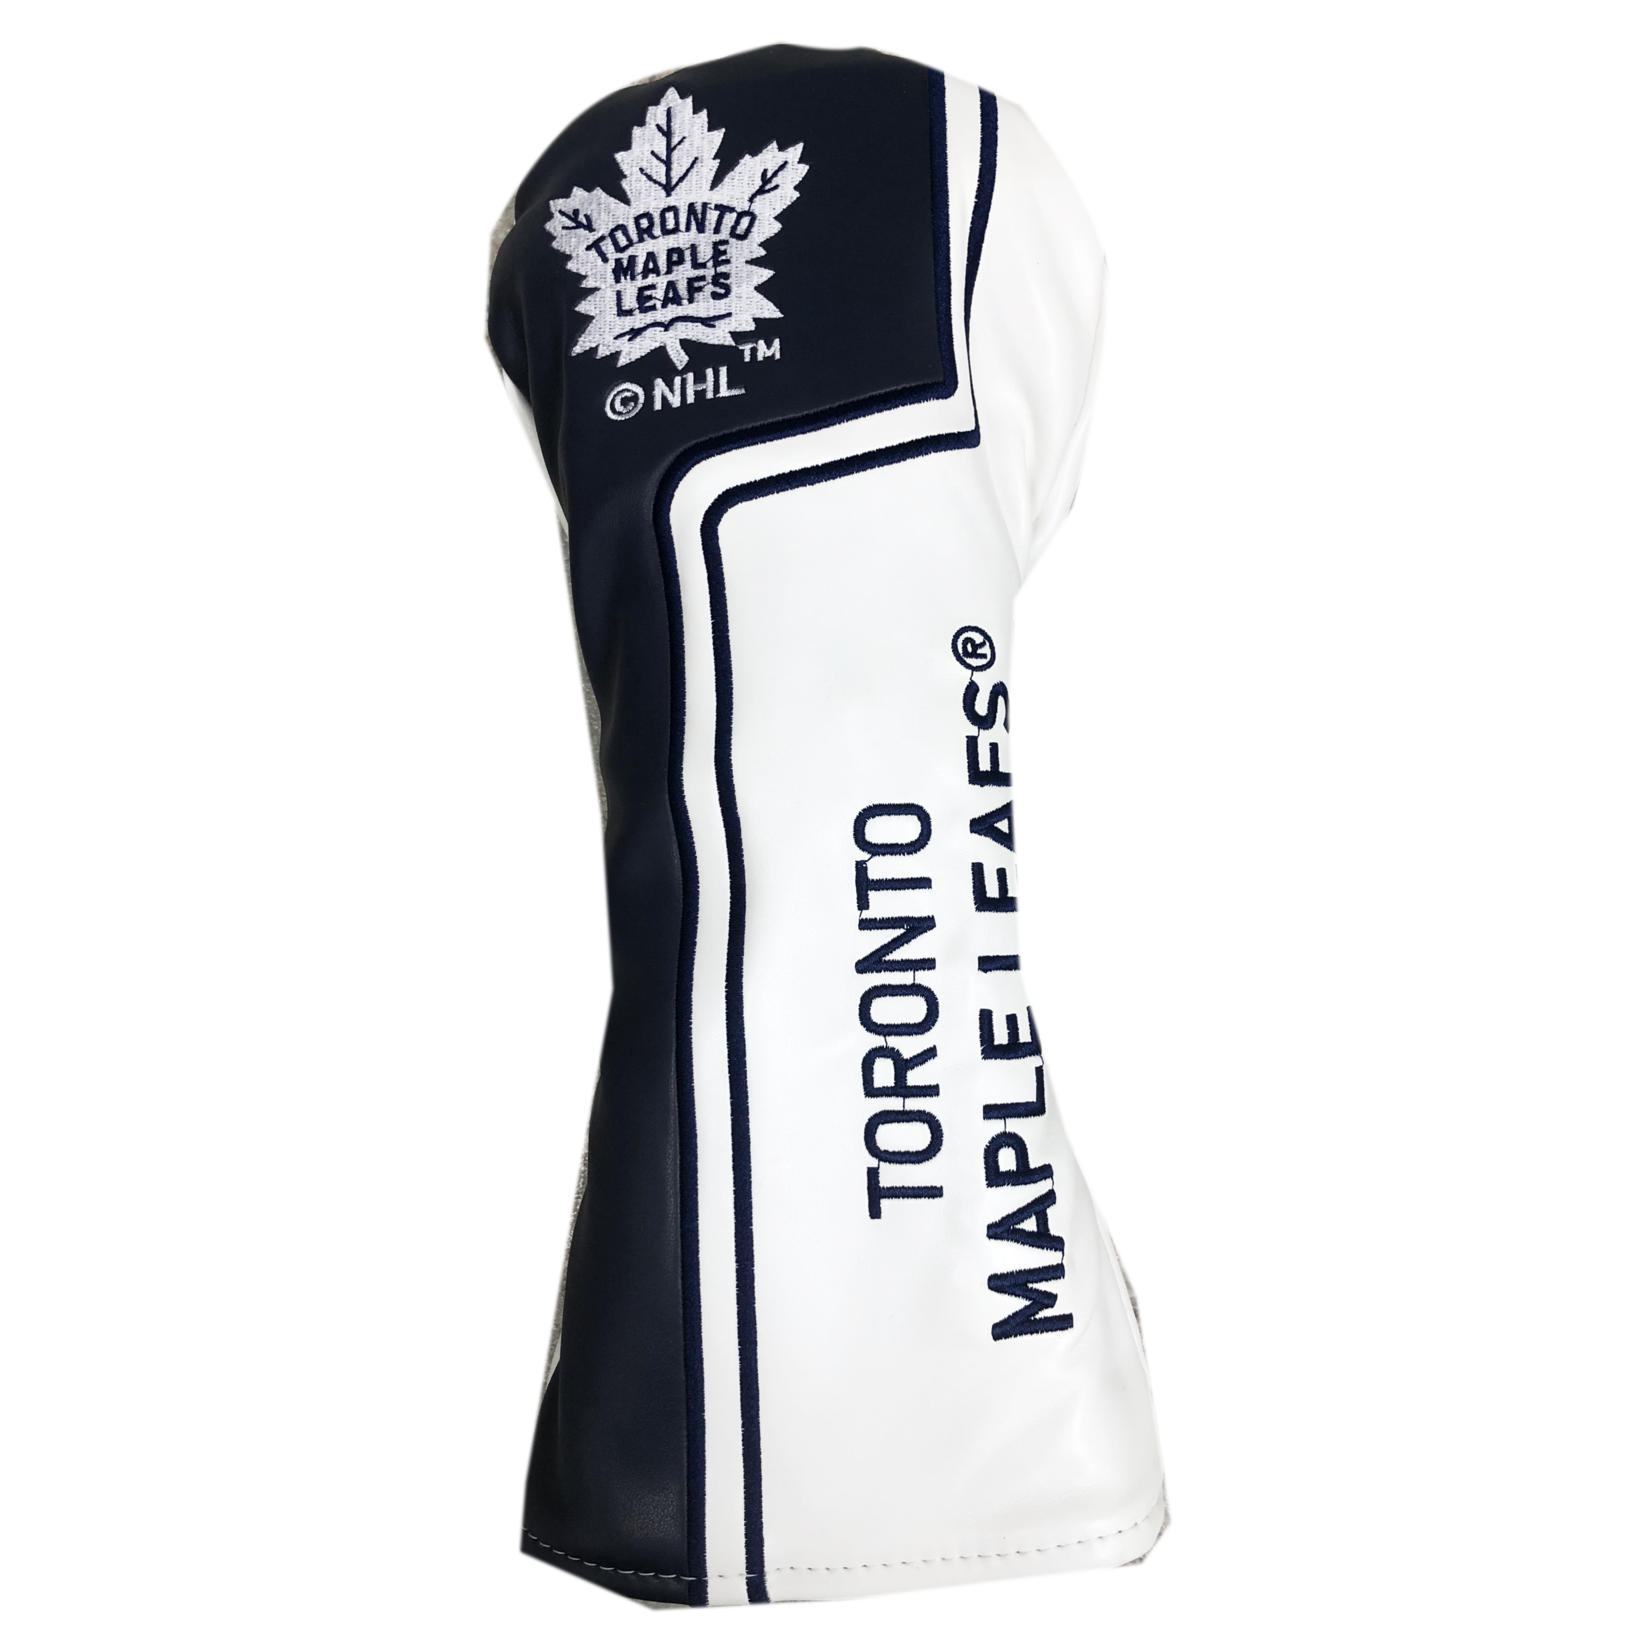 CaddyPro NHL Vintage Driver Headcover